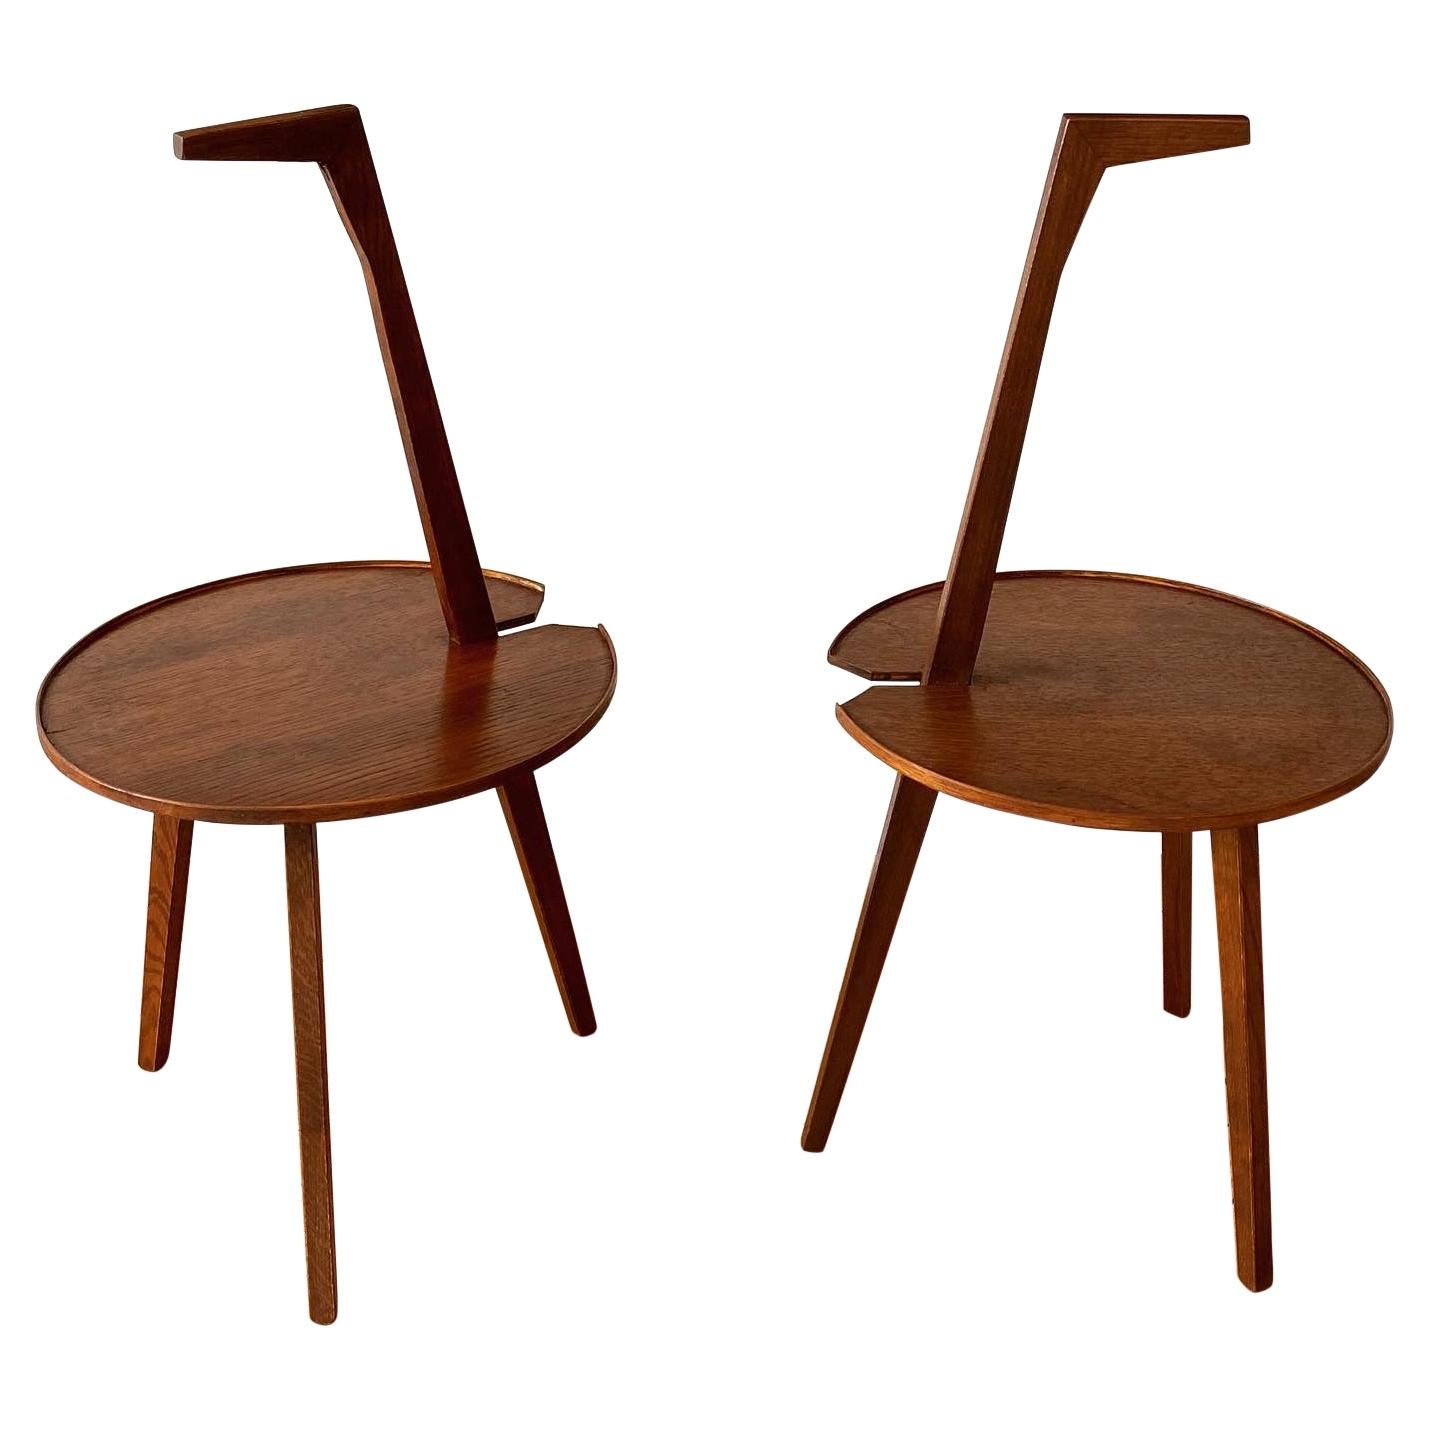 Franco Albini, Pair of Side Tables TN6 "Cicogna" 1950s